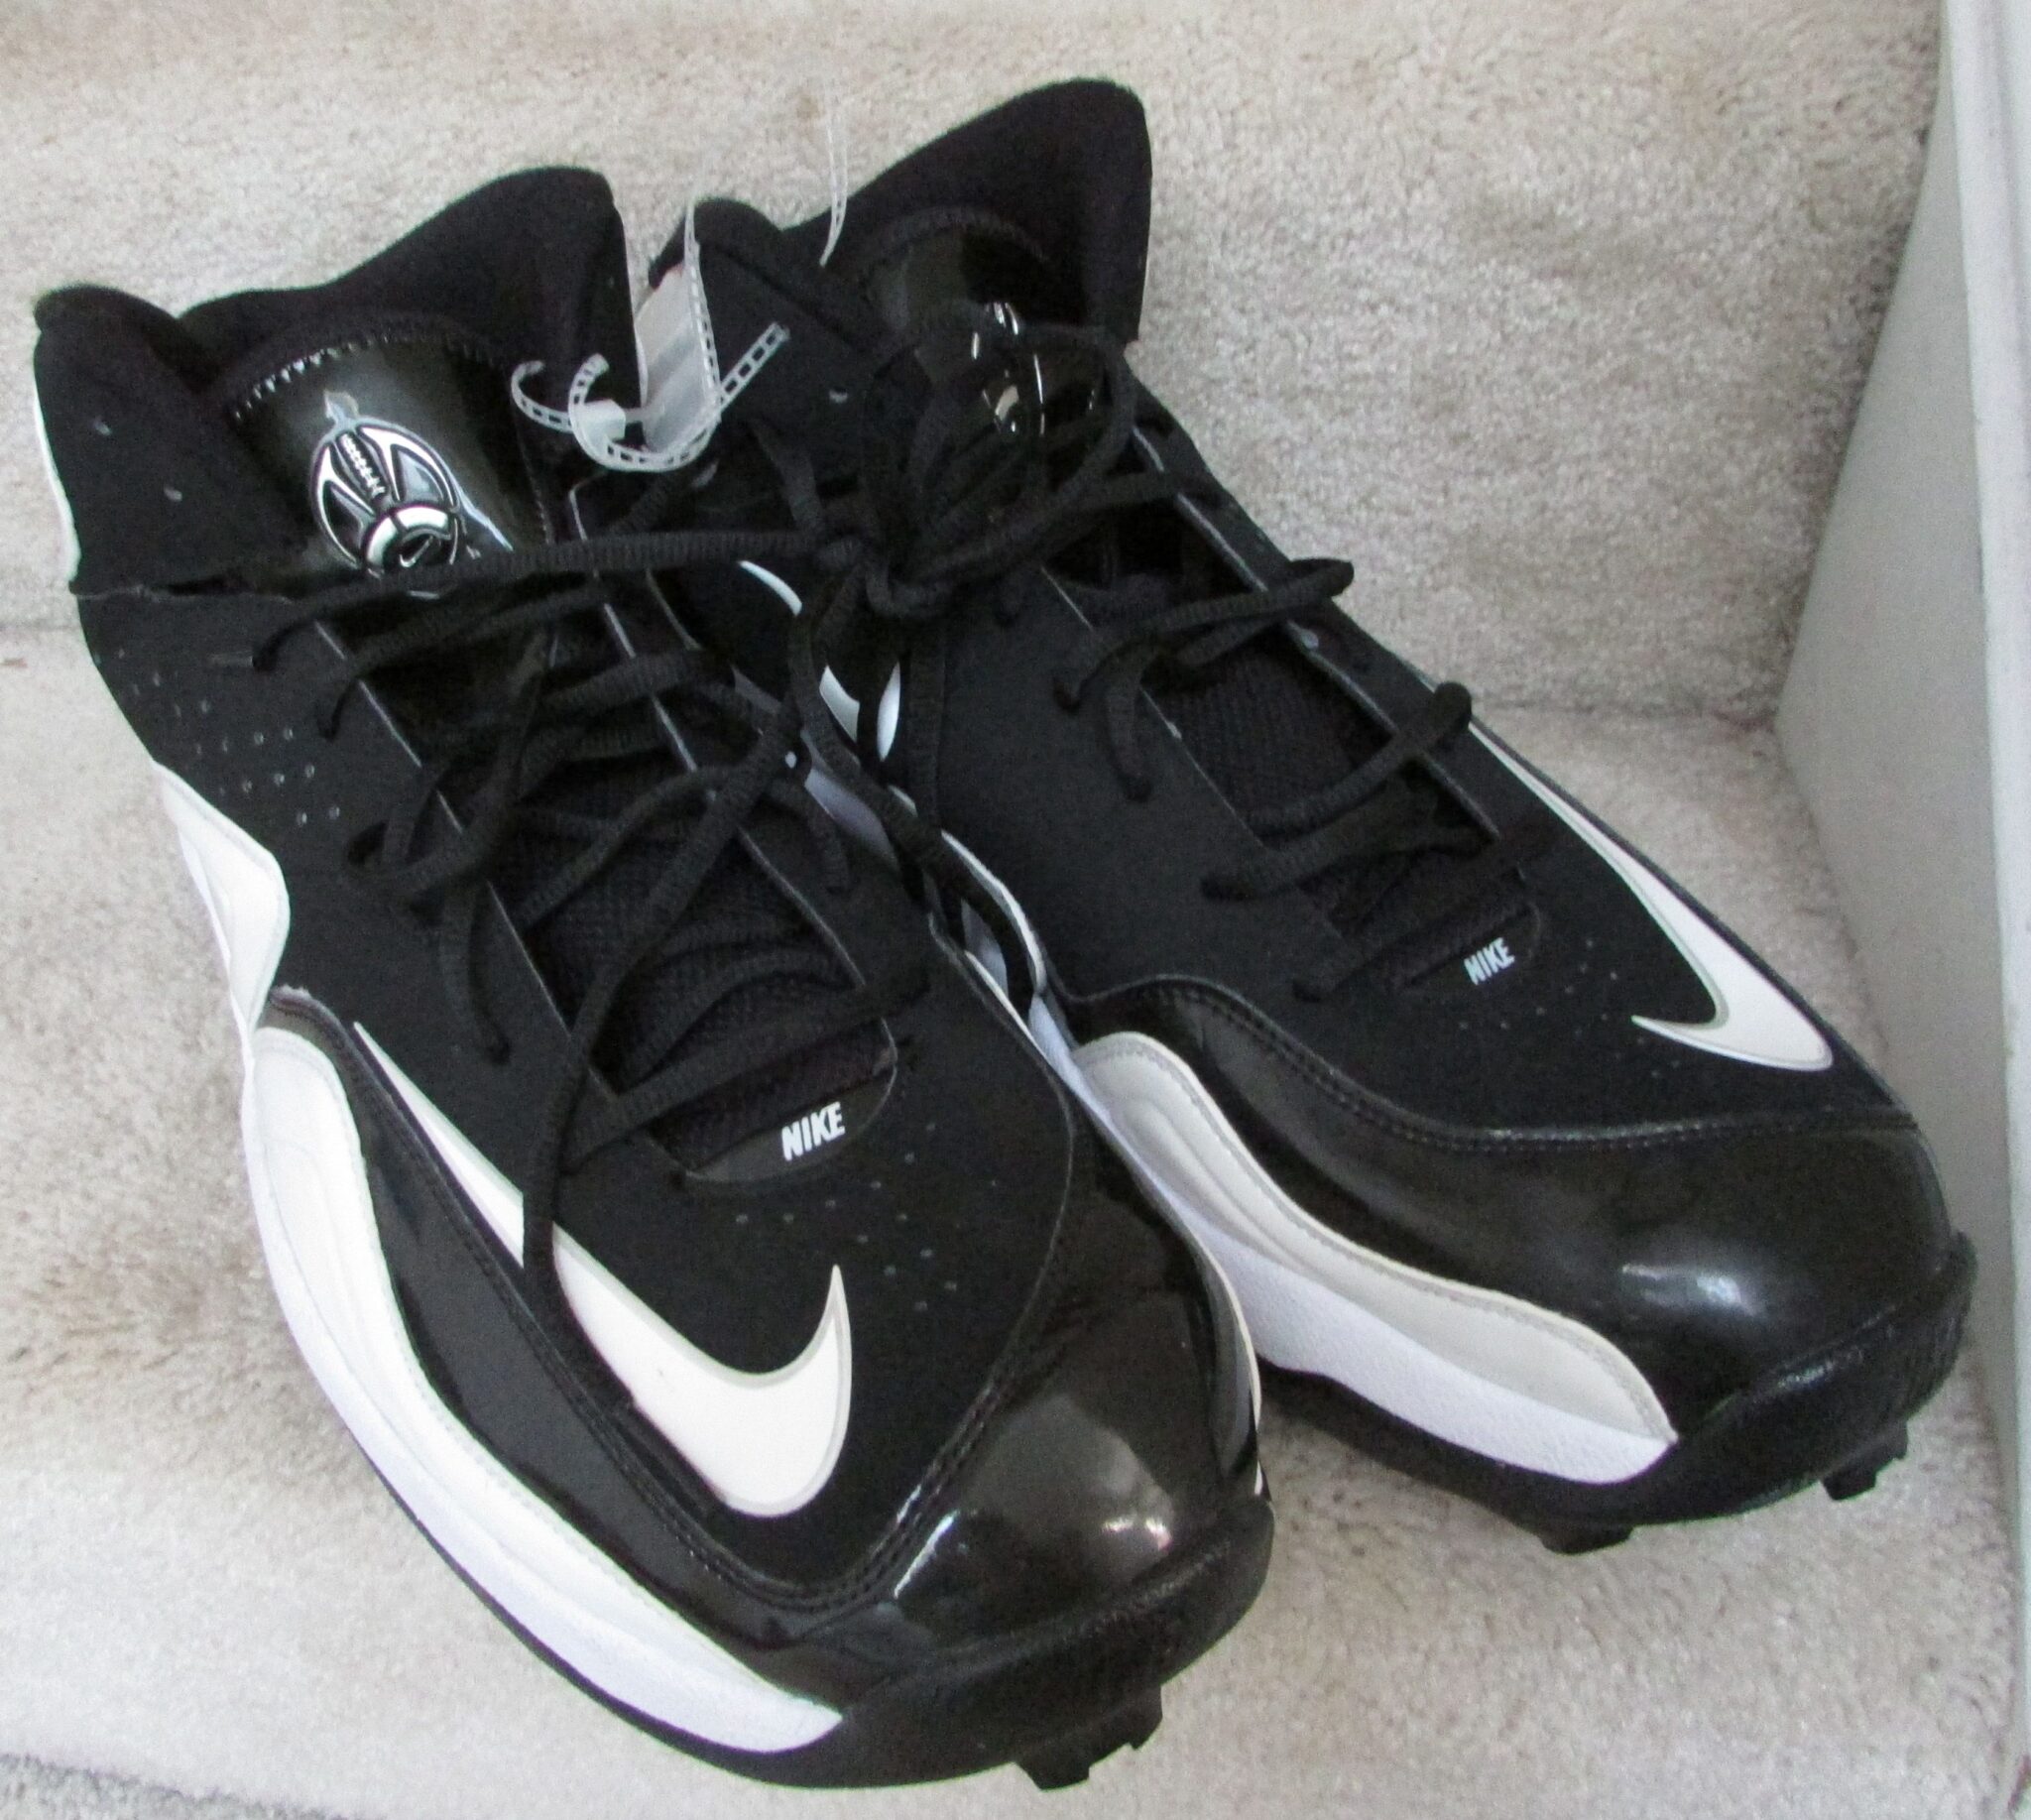 Nike Zoom Merciless Pro Shark Blk/White Football Cleats Shoes Size 18 ...